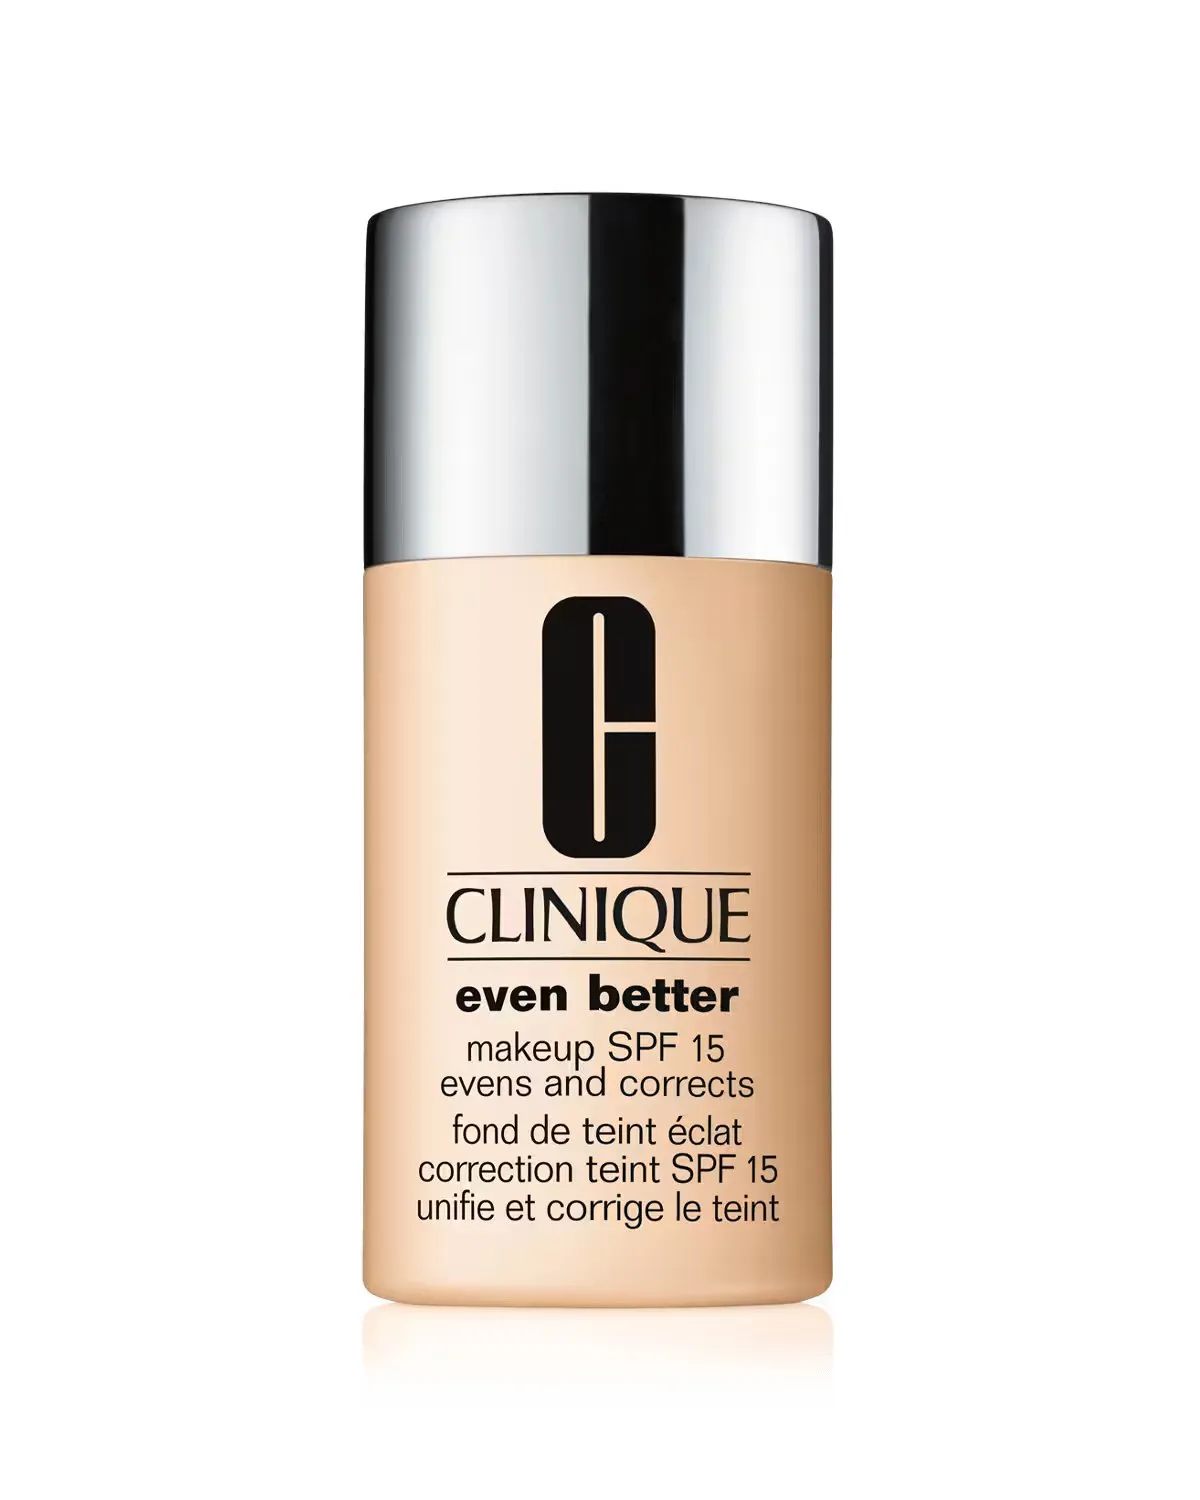 FEMMENORDIC's choice in the Clinique Even Better vs Even Better Refresh comparison, the Clinique Even Better Makeup SPF15.